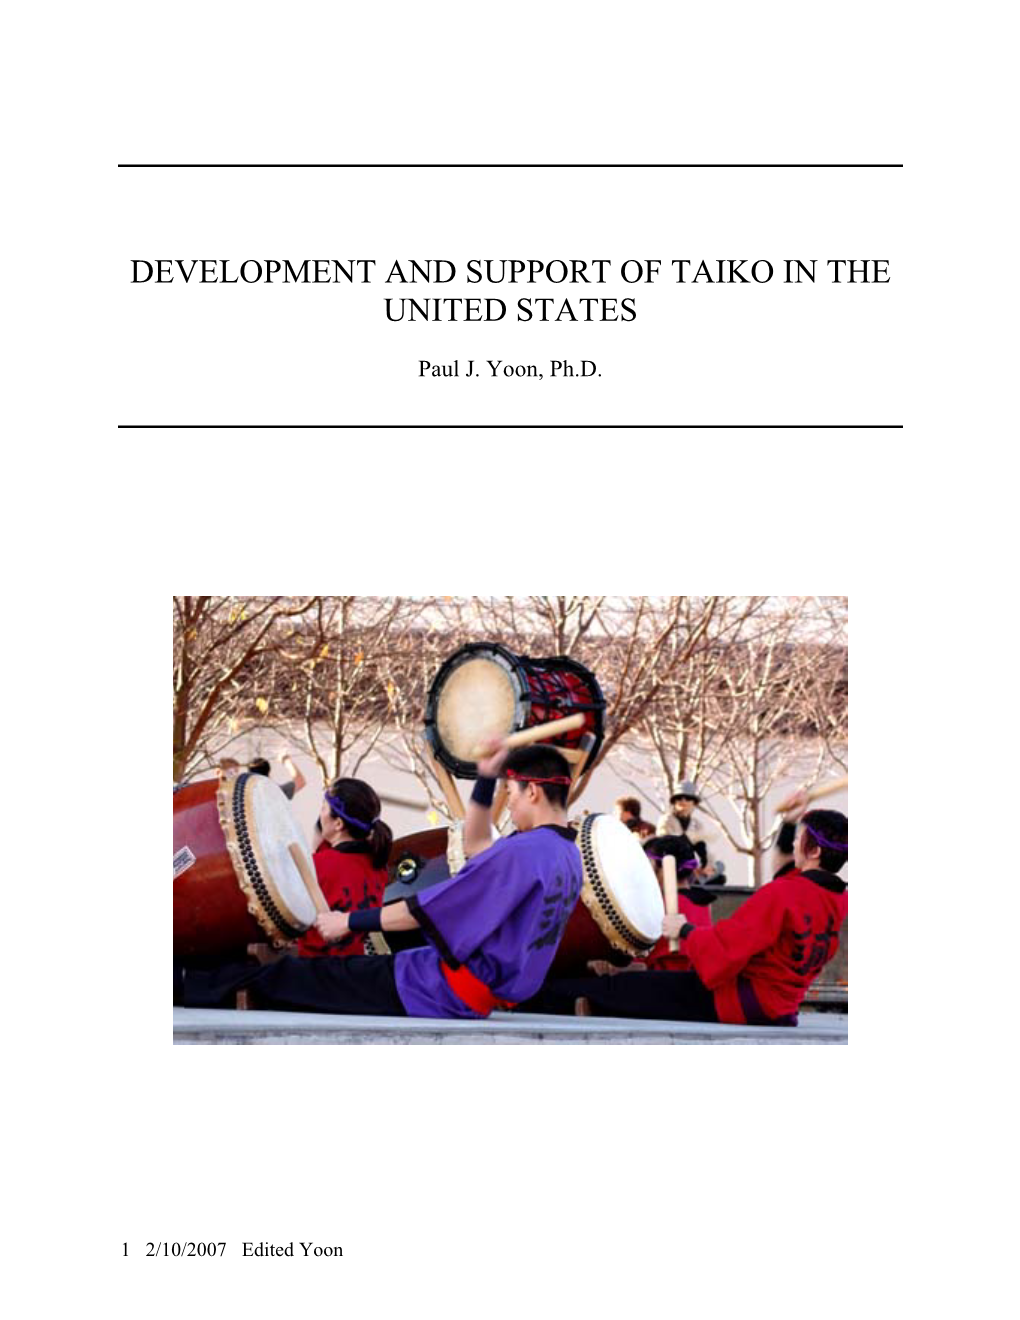 Development and Support of Taiko in the United States